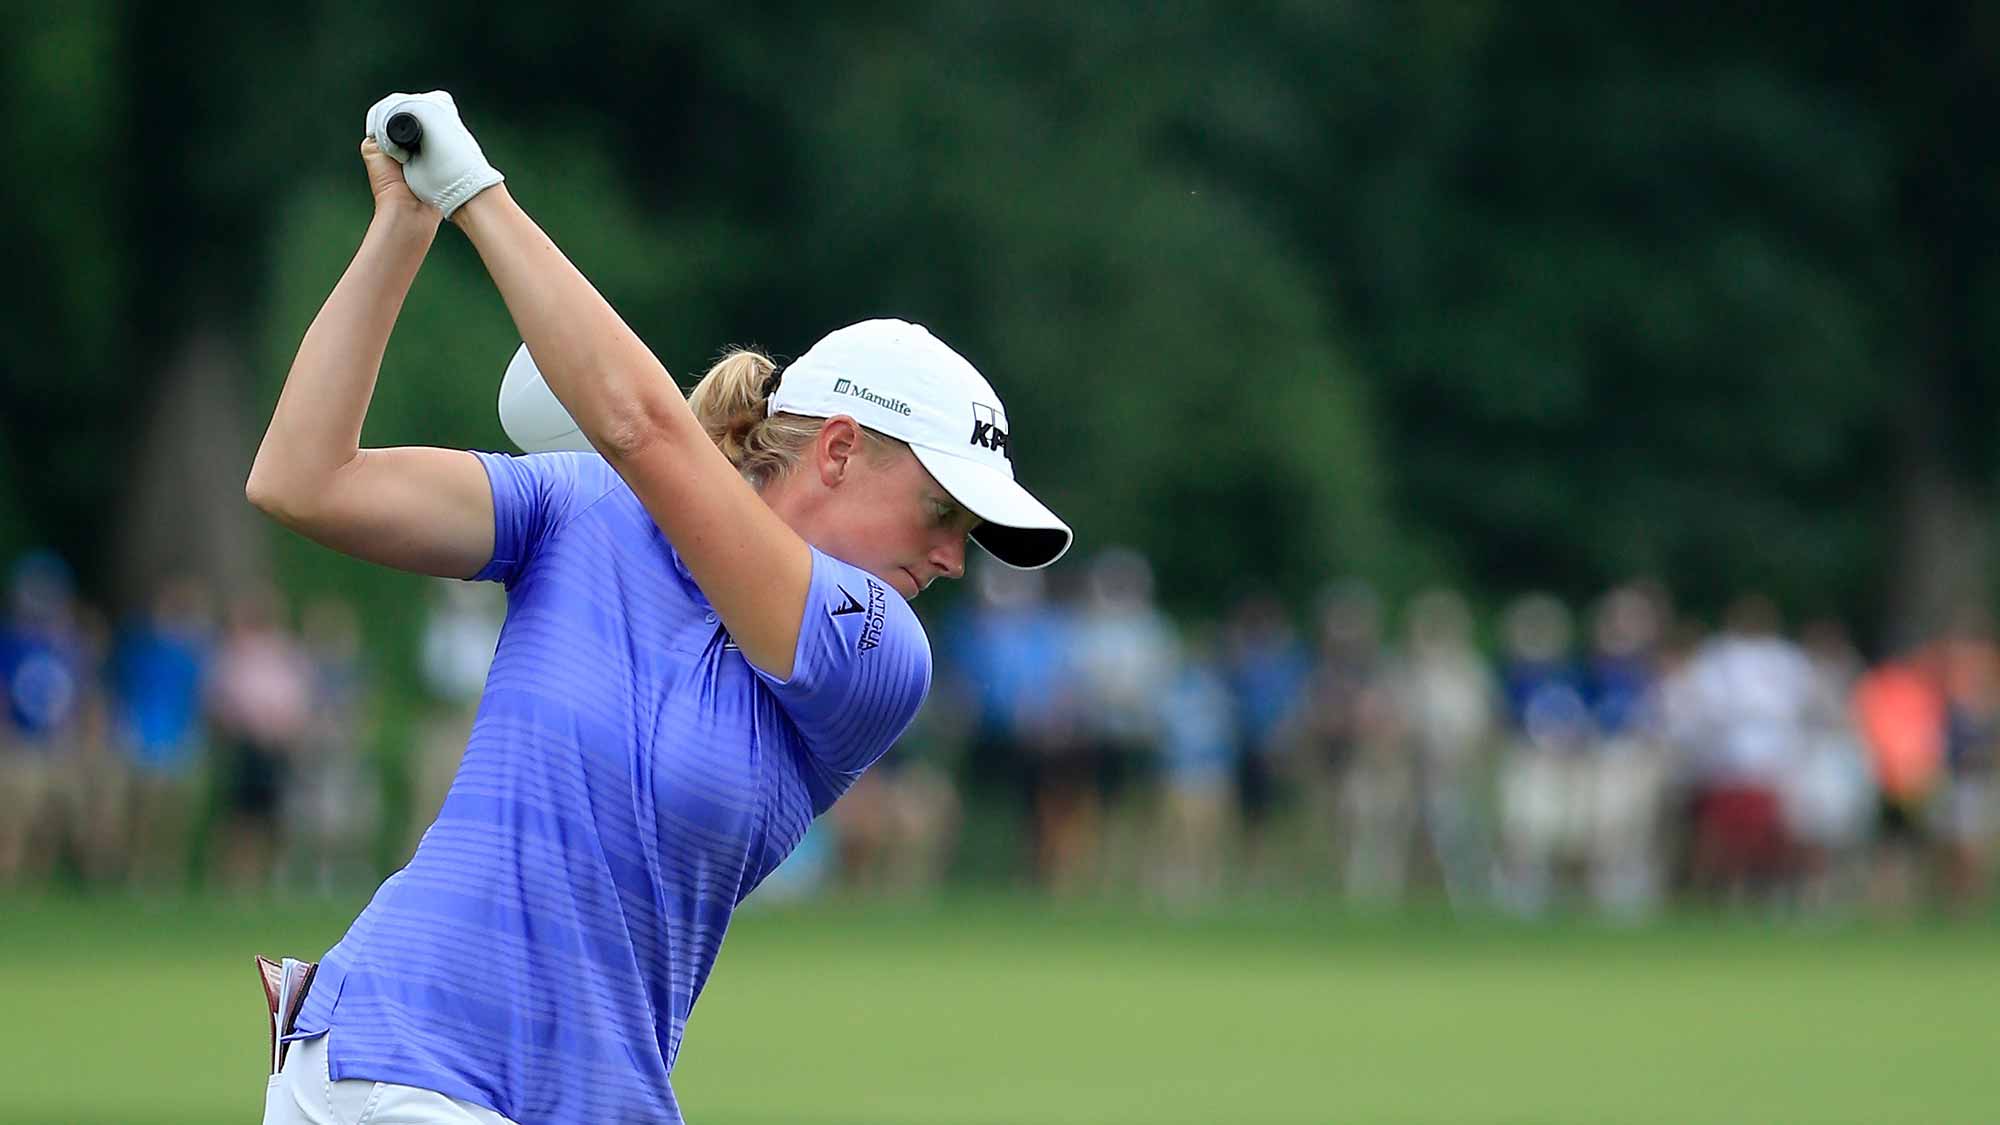 Stacy Lewis of the United States plays a shot on the seventh hole during the first round of the U.S. Women's Open at Lancaster Country Club